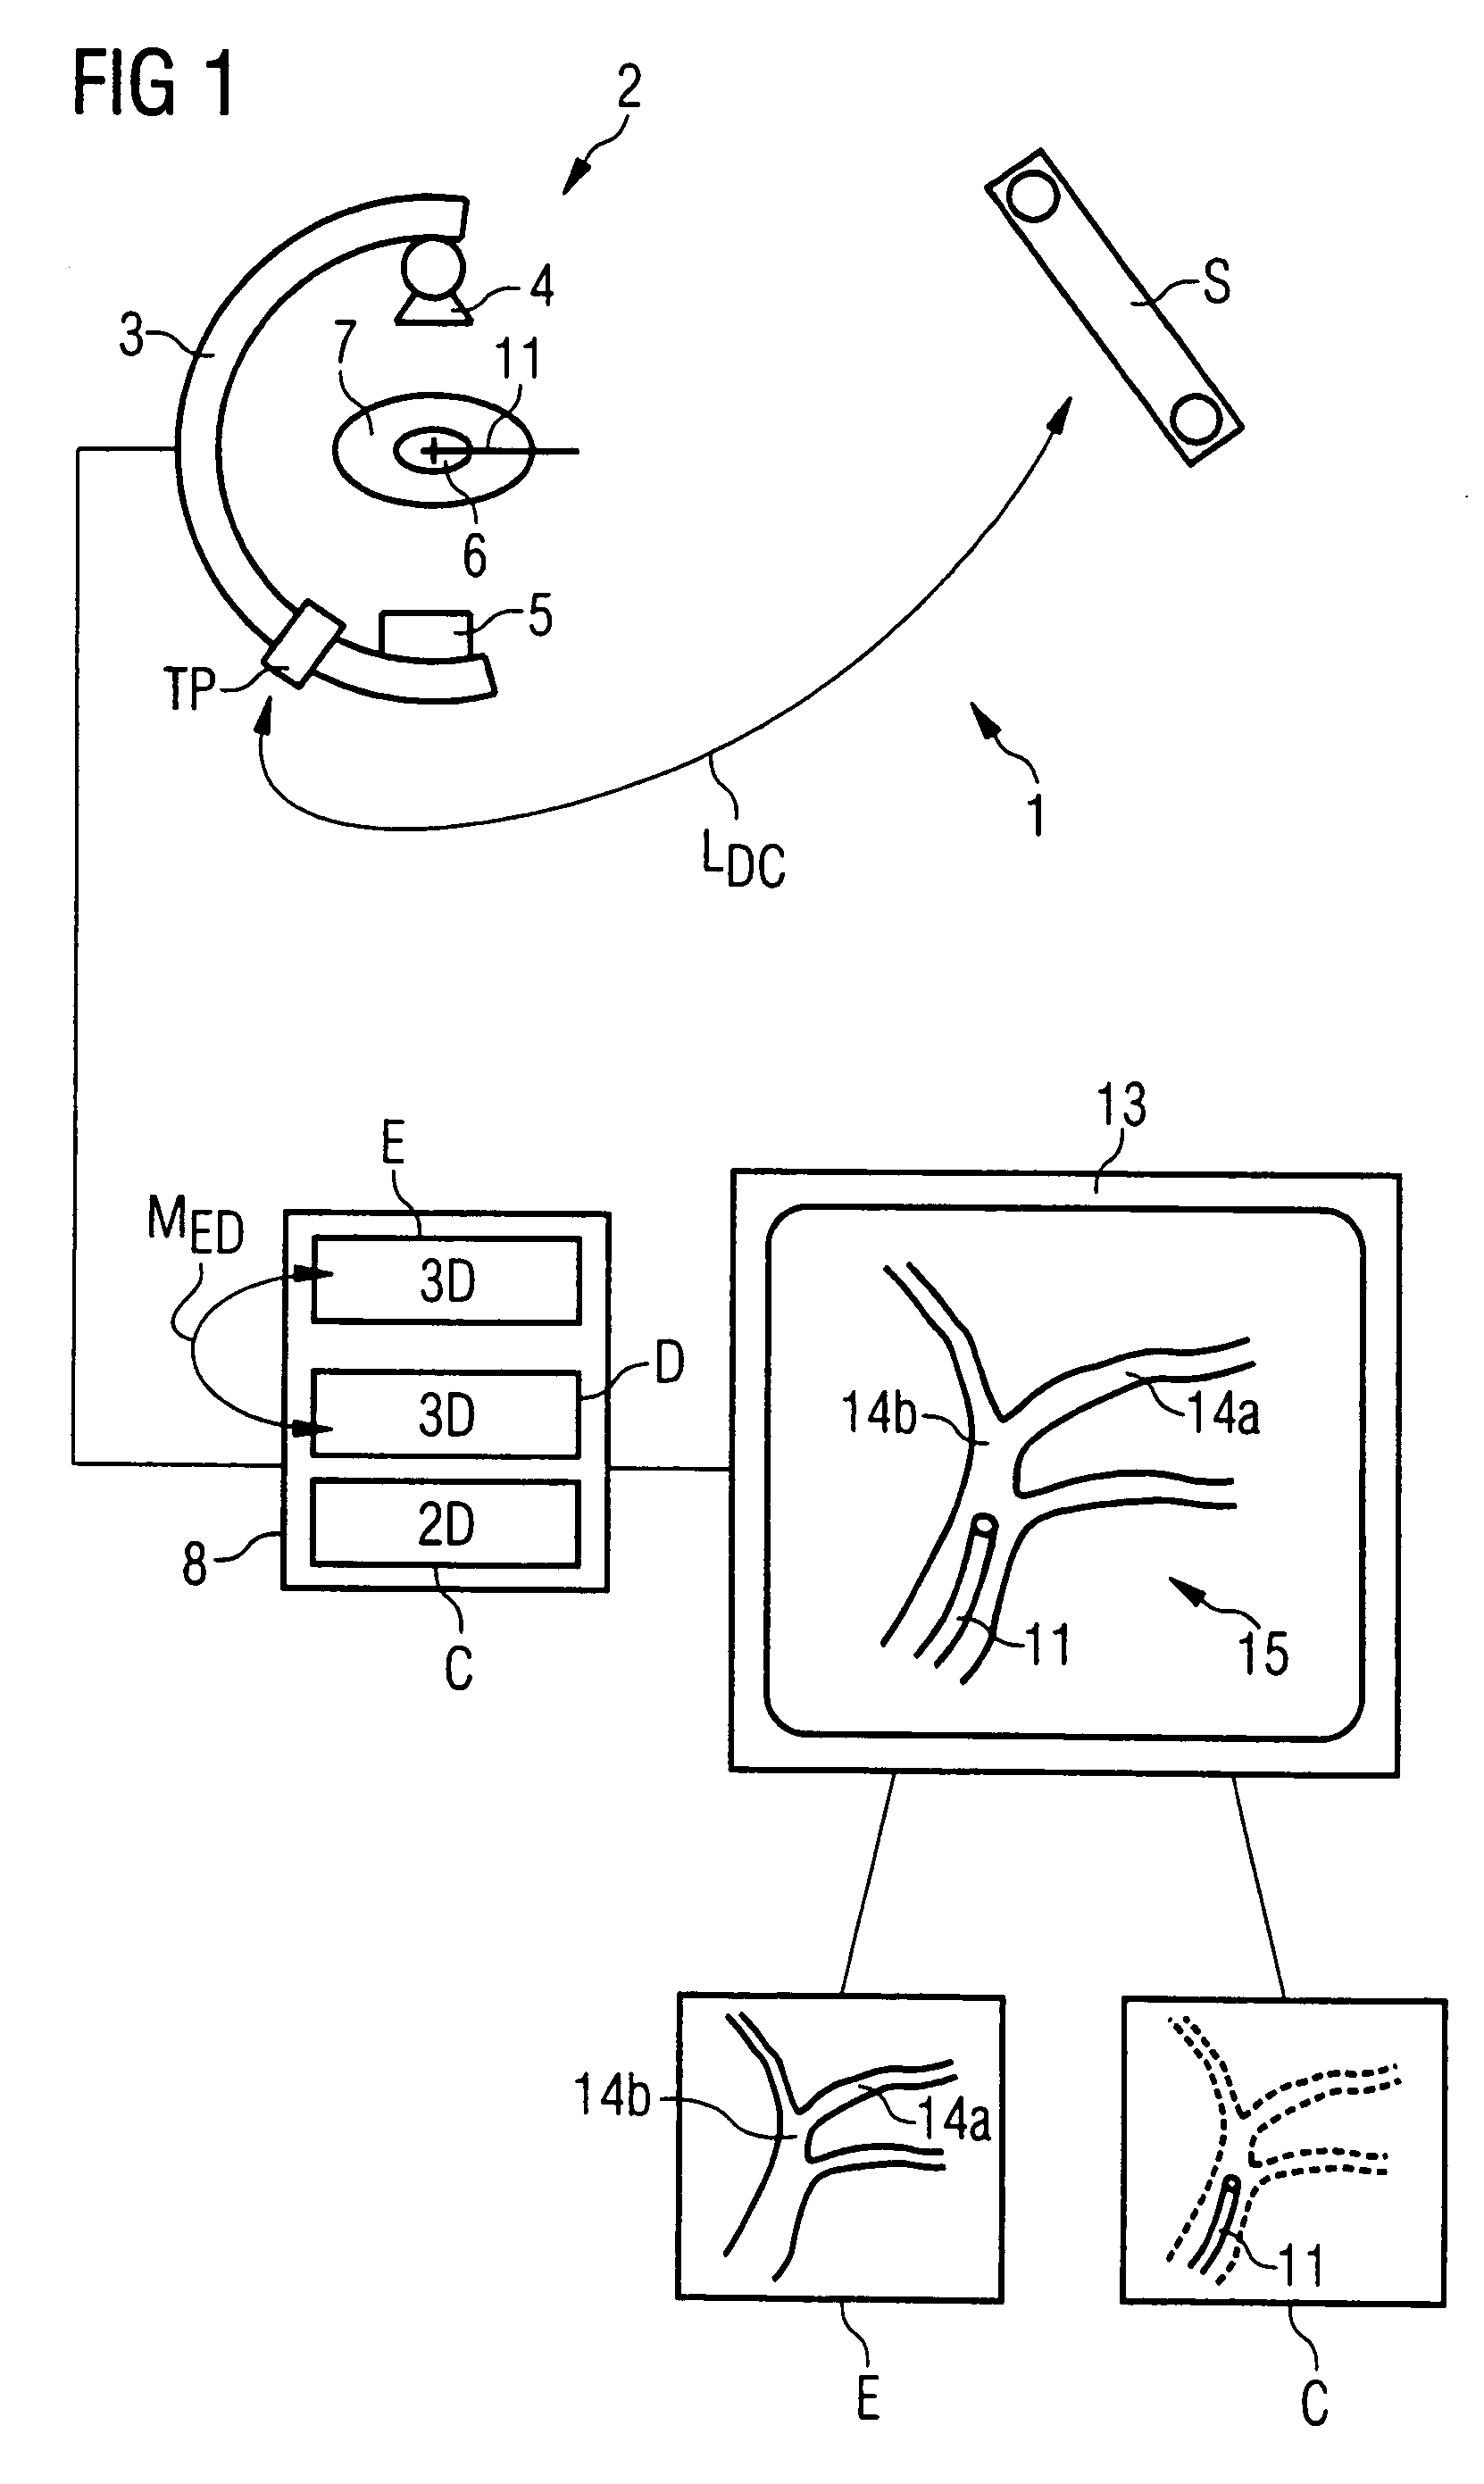 Method for marker-free automatic fusion of 2-D fluoroscopic C-arm images with preoperative 3D images using an intraoperatively obtained 3D data record